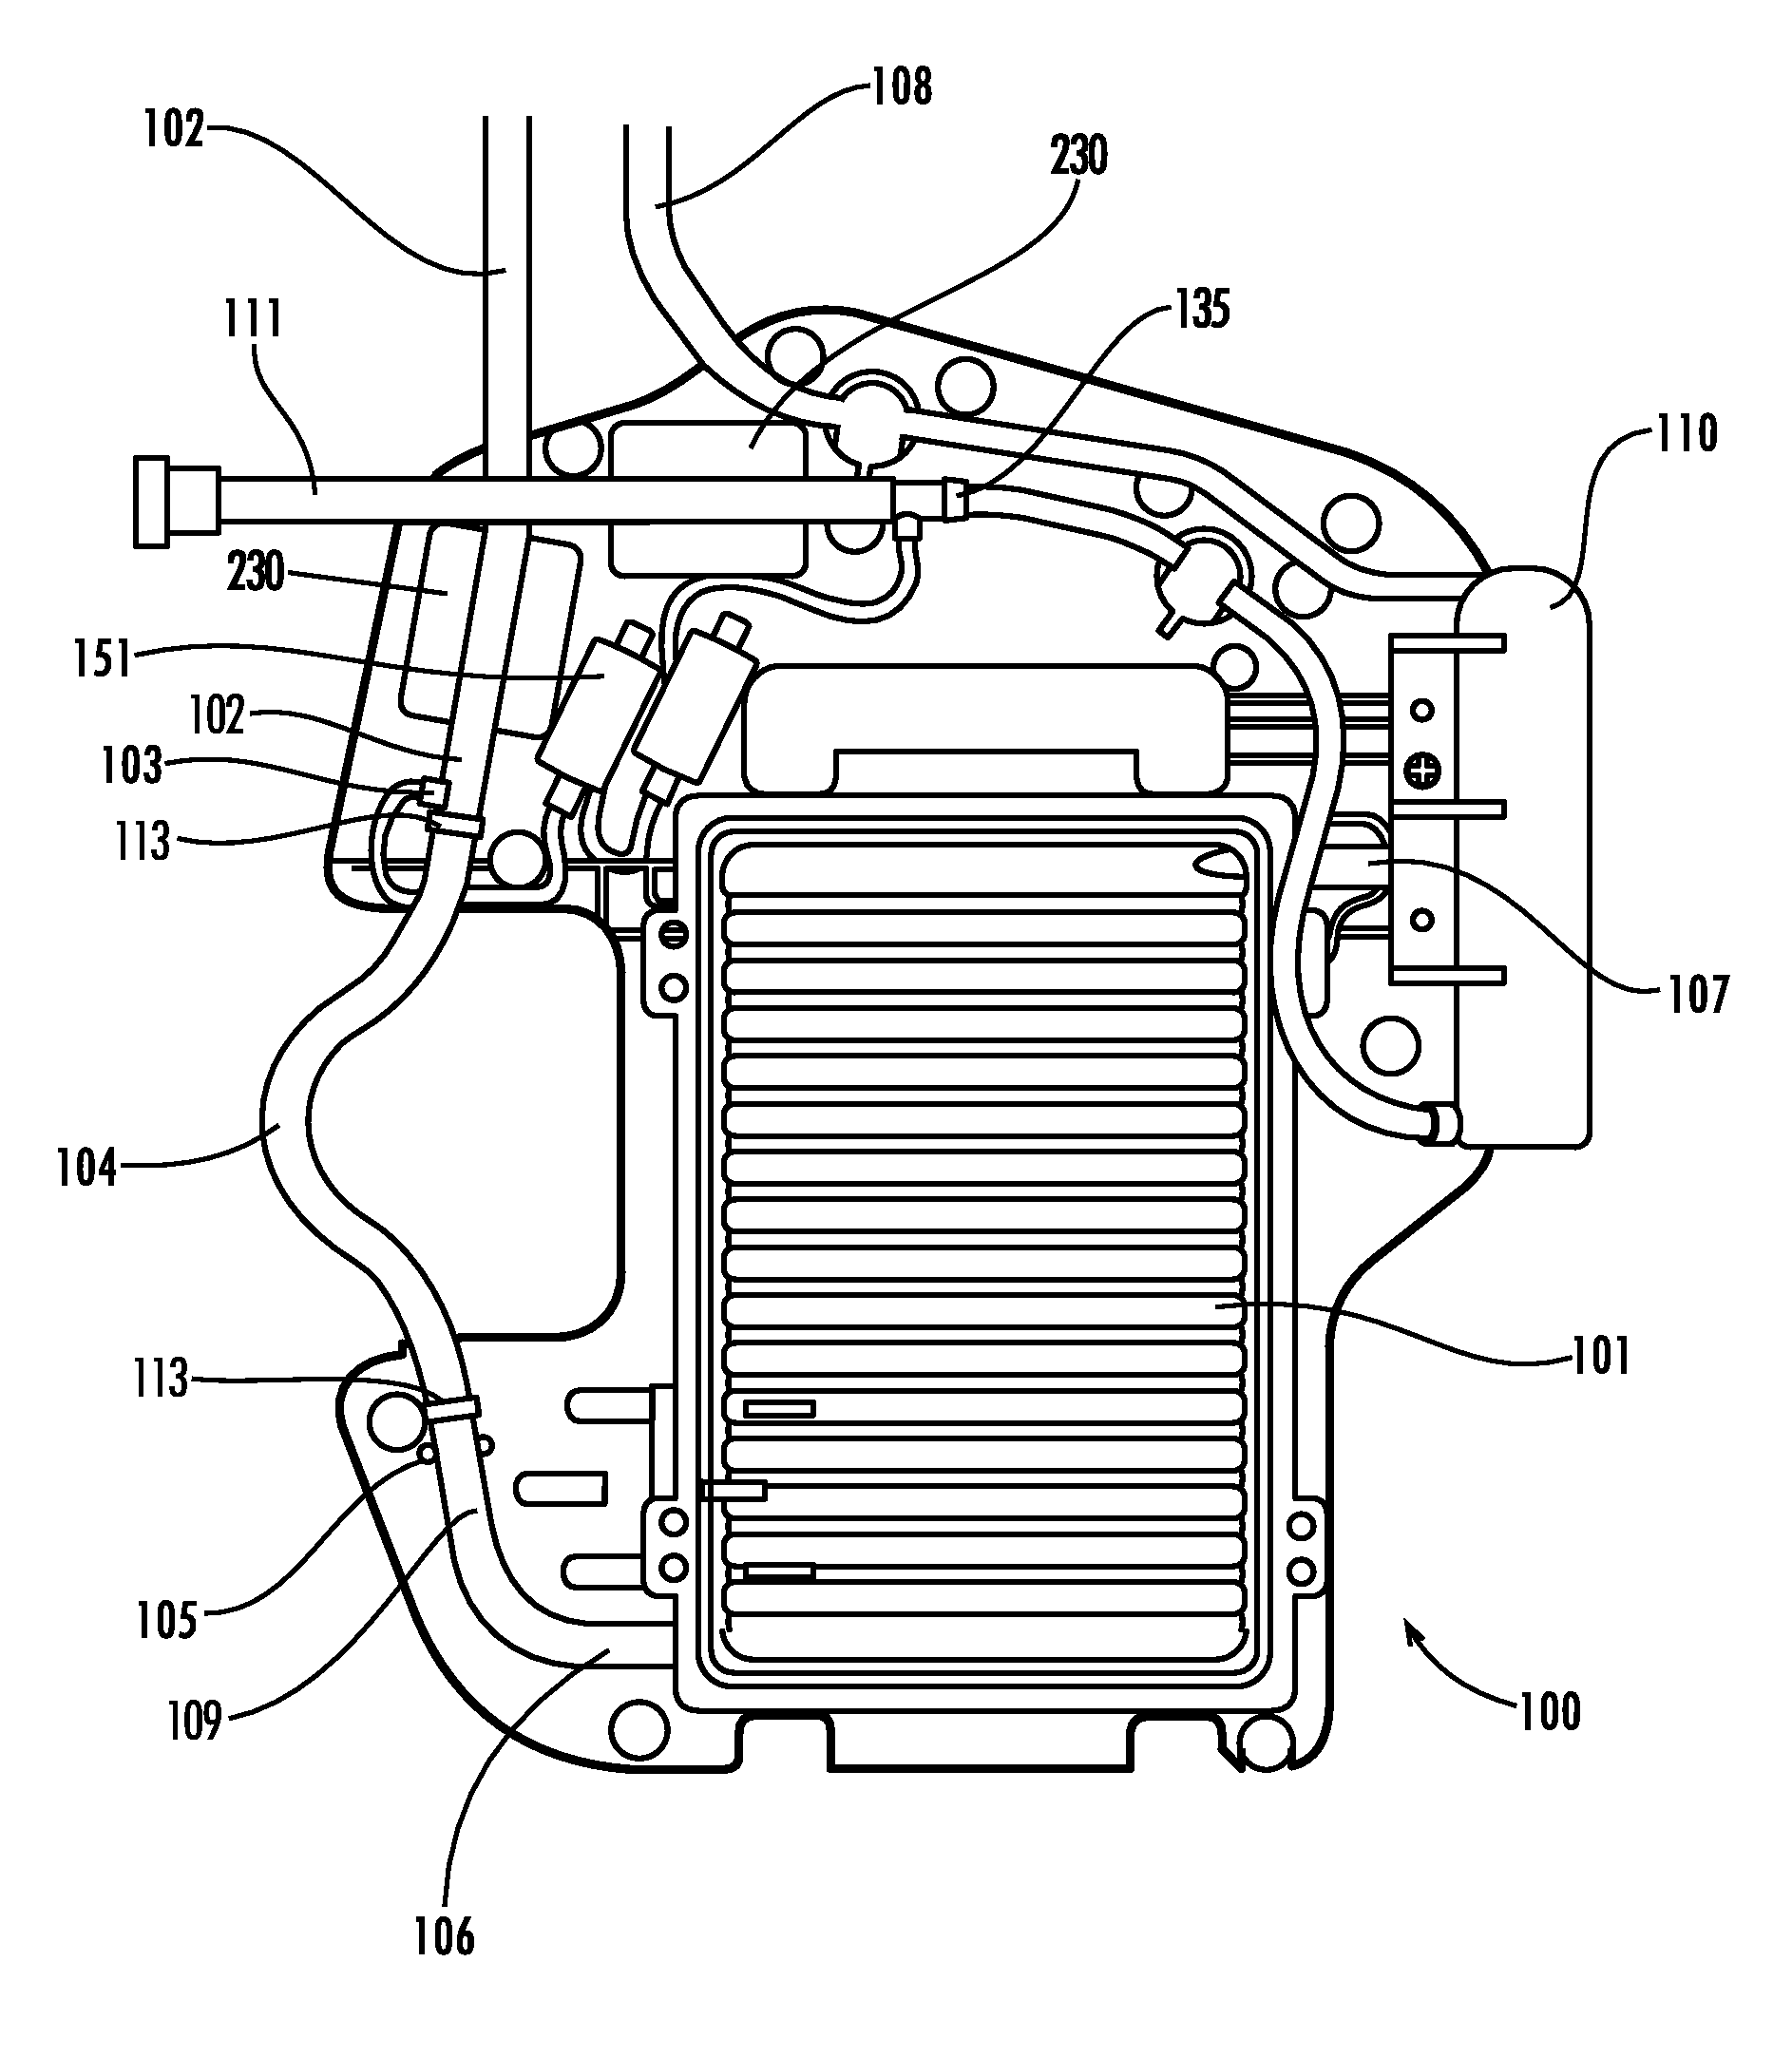 Heat exchange system for a pump device